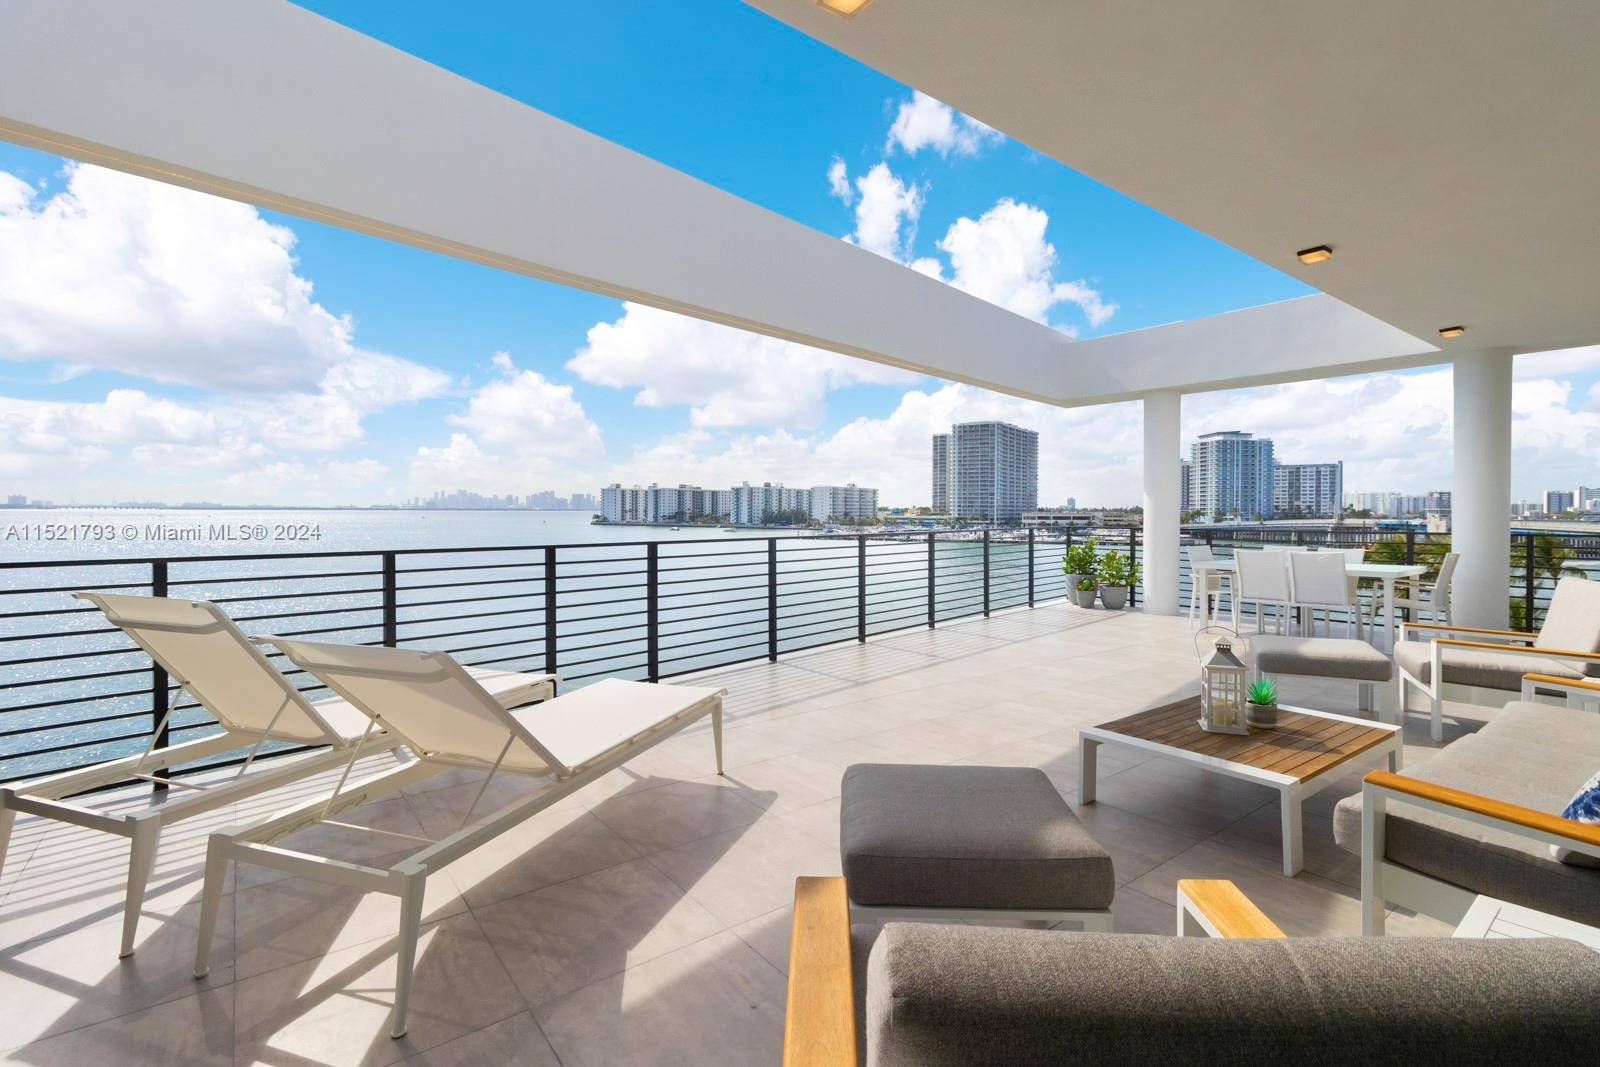 This opulent penthouse offers an unparalleled waterfront lifestyle, boasting a private boat dock and awe inspiring panoramic views of the bay.